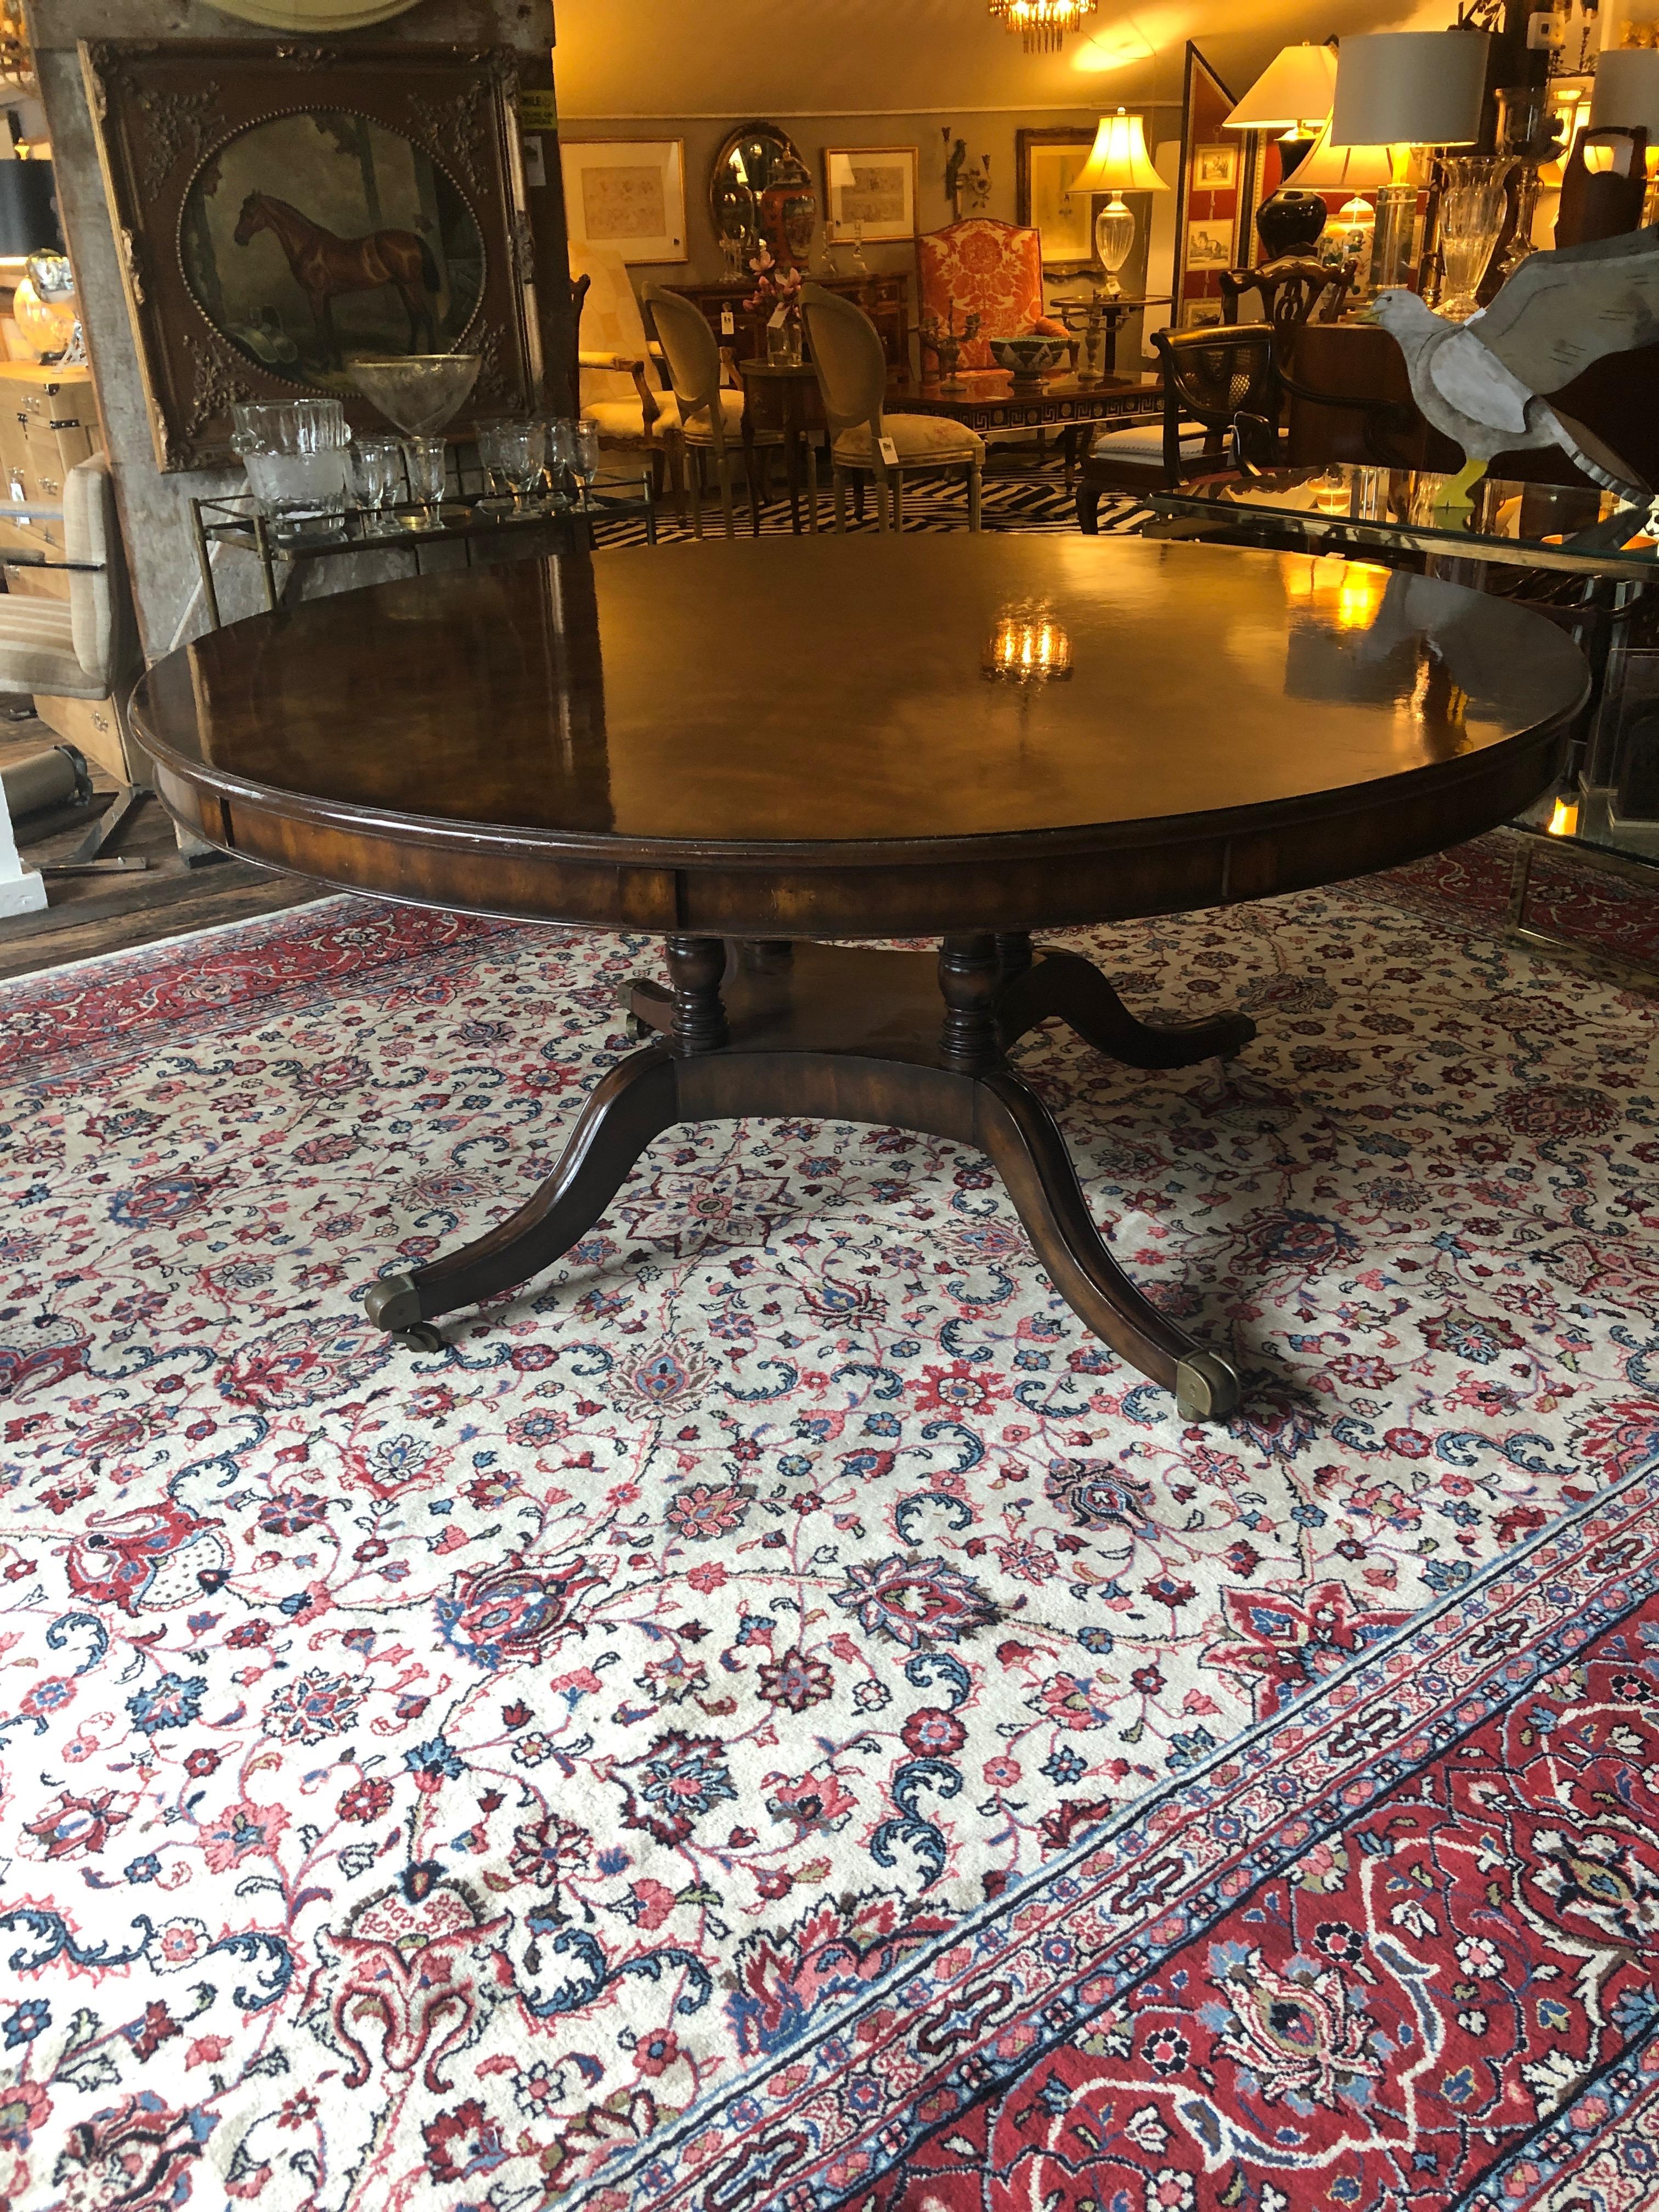 Incredibly made Regency crotch mahogany turn of the century dining table. Having sunburst central inlay and 5 leaves that attach around the periphery to make a very grand large round table. Without the leaves table is 63.25